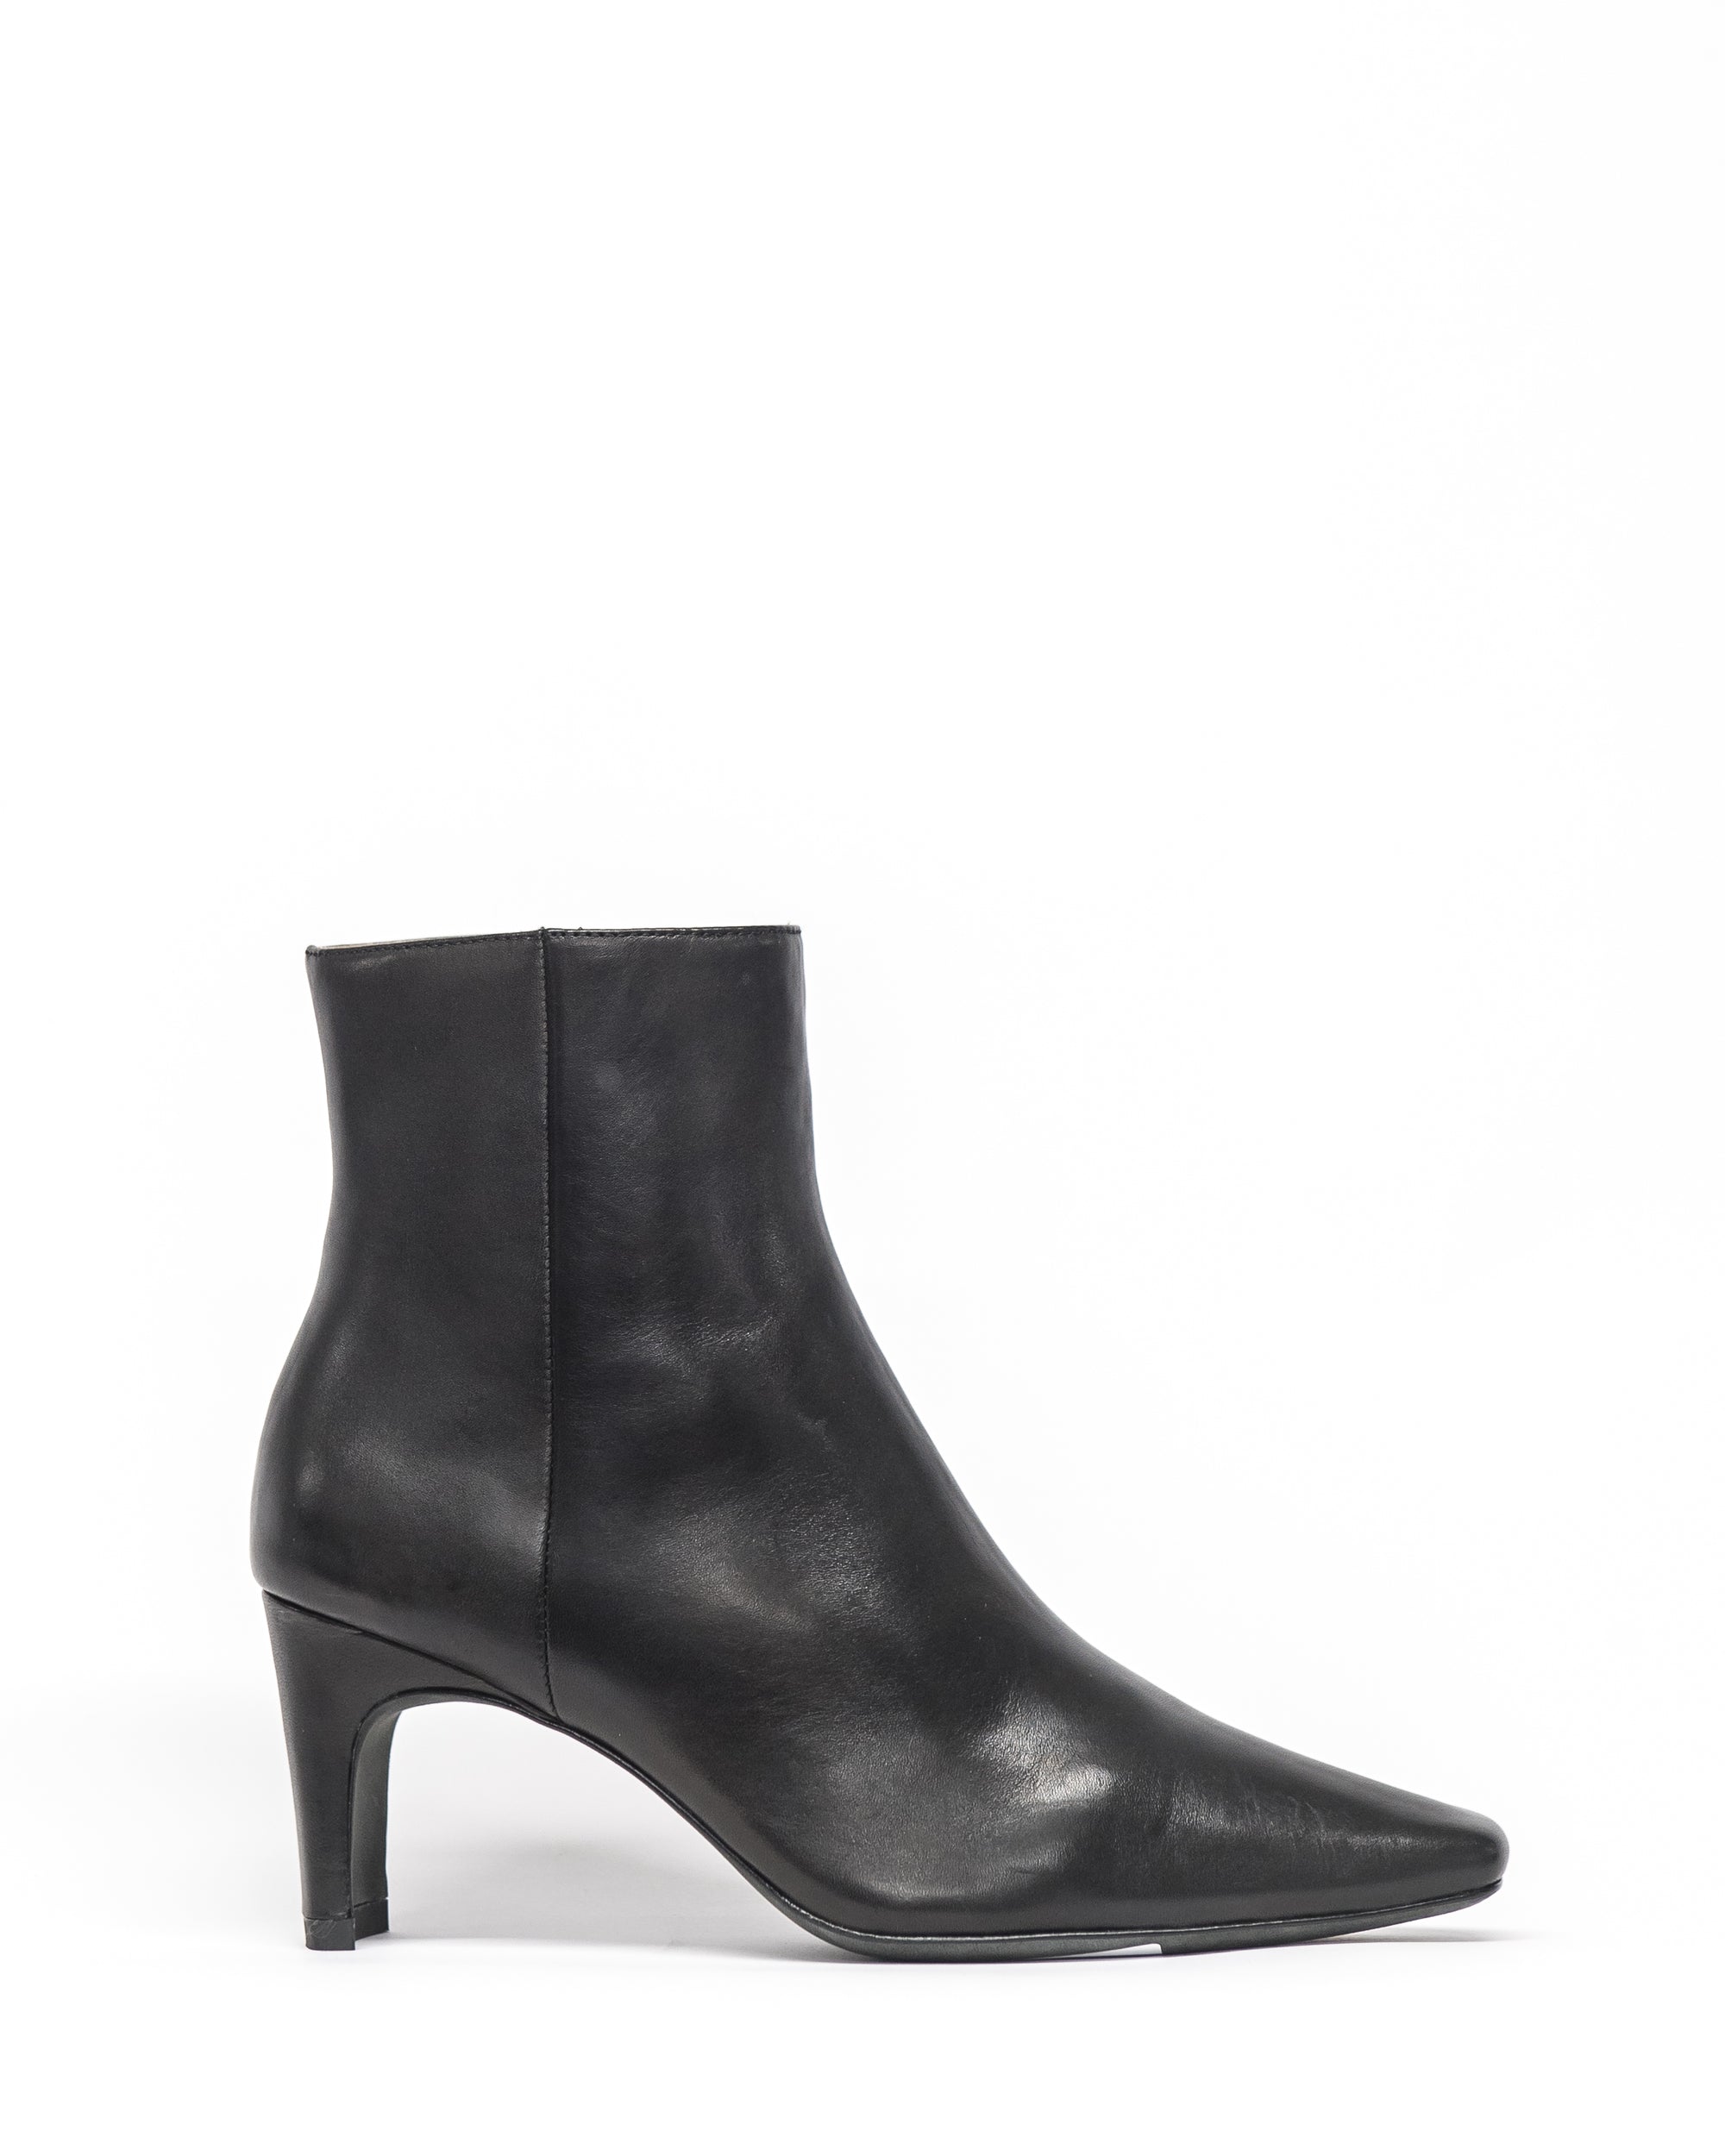 rouge boot - black leather